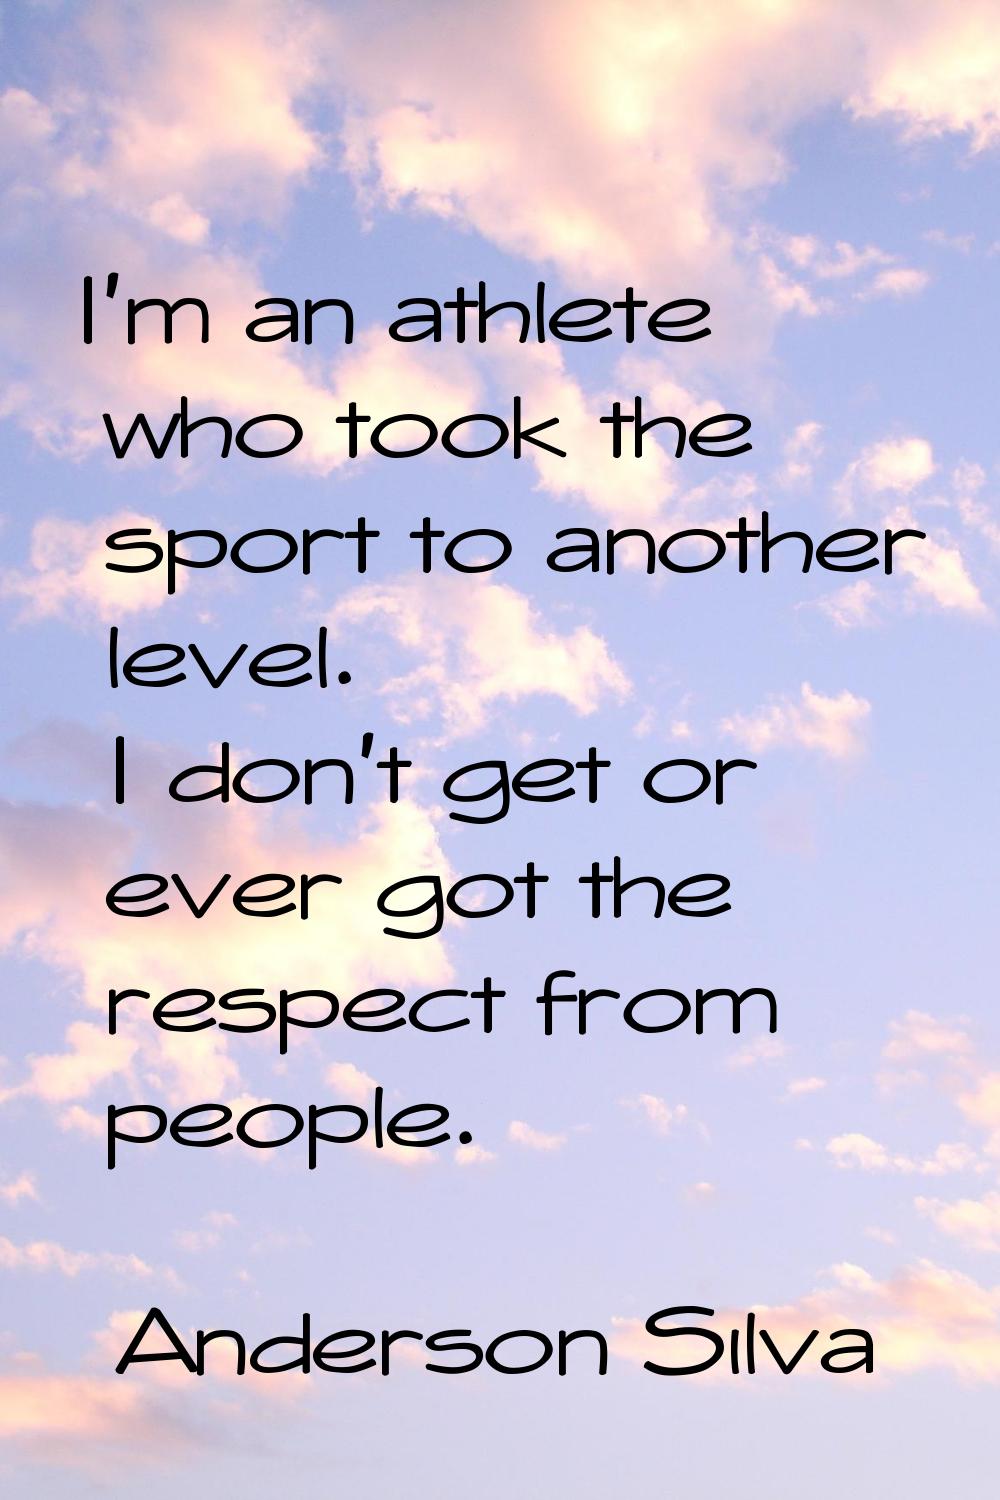 I'm an athlete who took the sport to another level. I don't get or ever got the respect from people